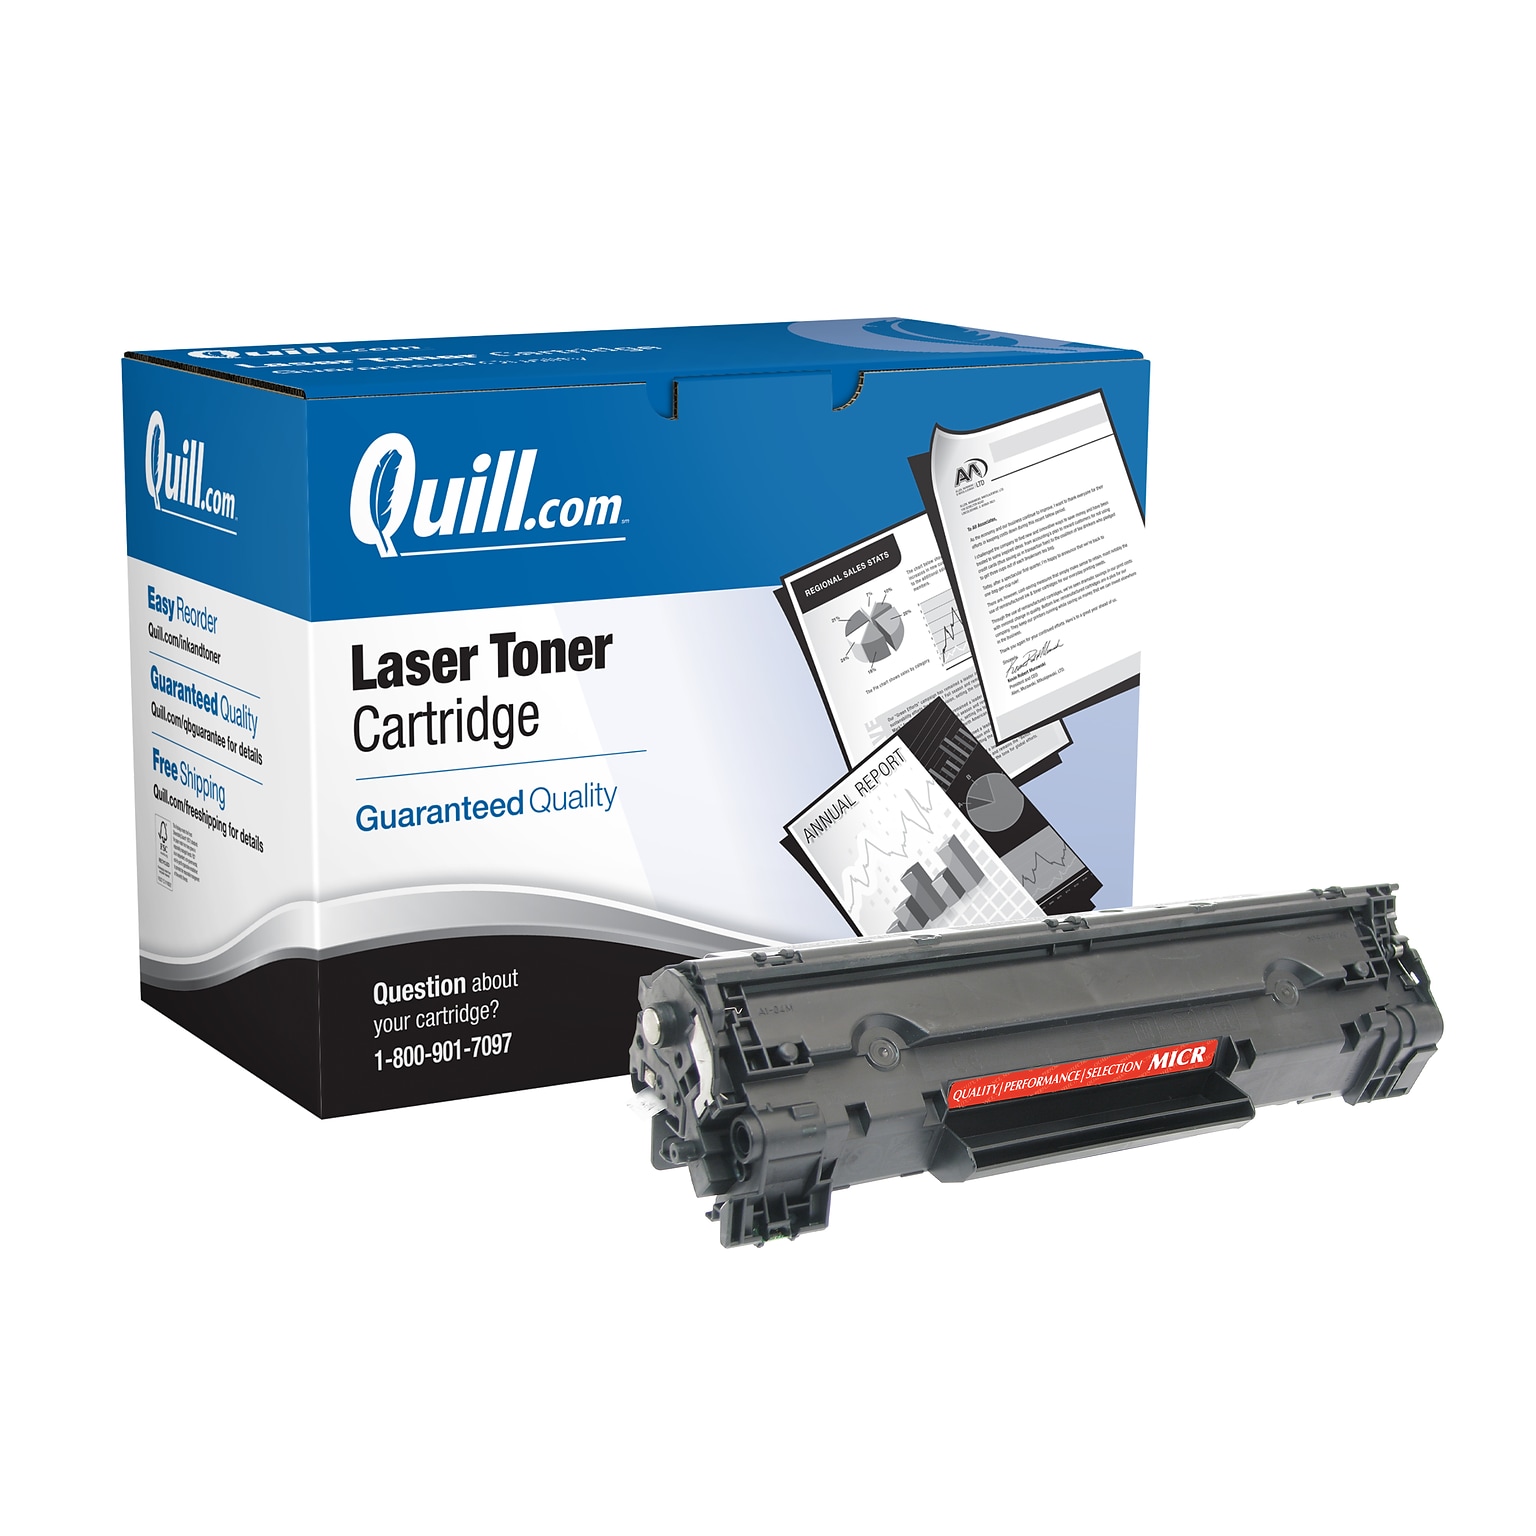 Quill Brand® Remanufactured Black Standard Yield MICR Toner Cartridge Replacement for HP 36A (CB436A) (Lifetime Warranty)